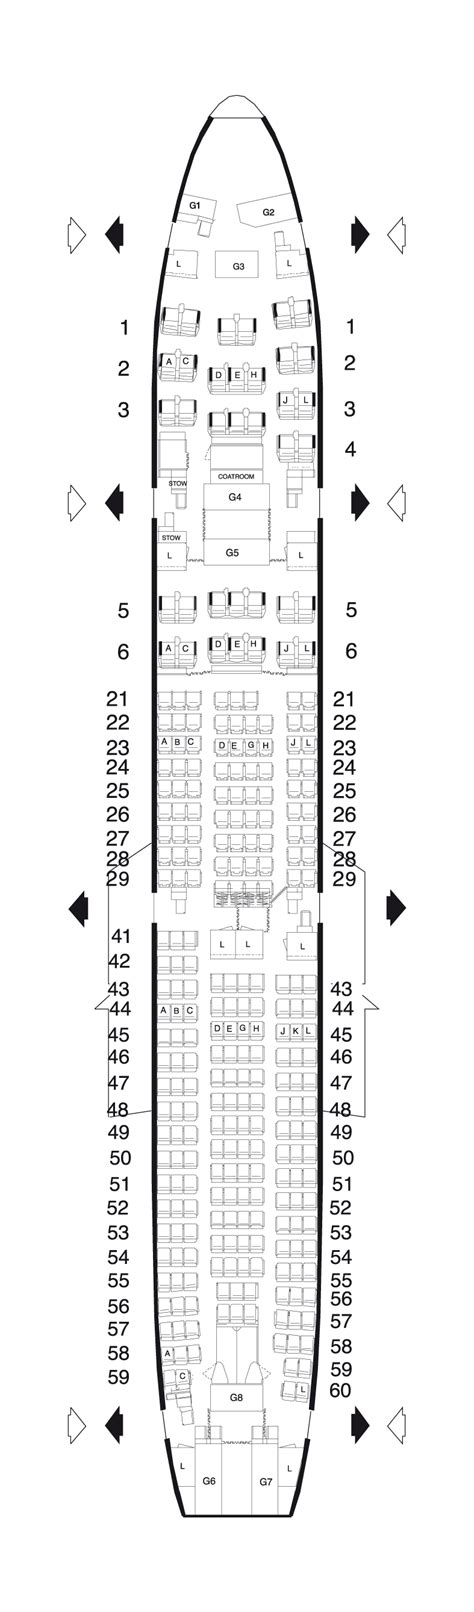 United Airlines Seat Selection Map